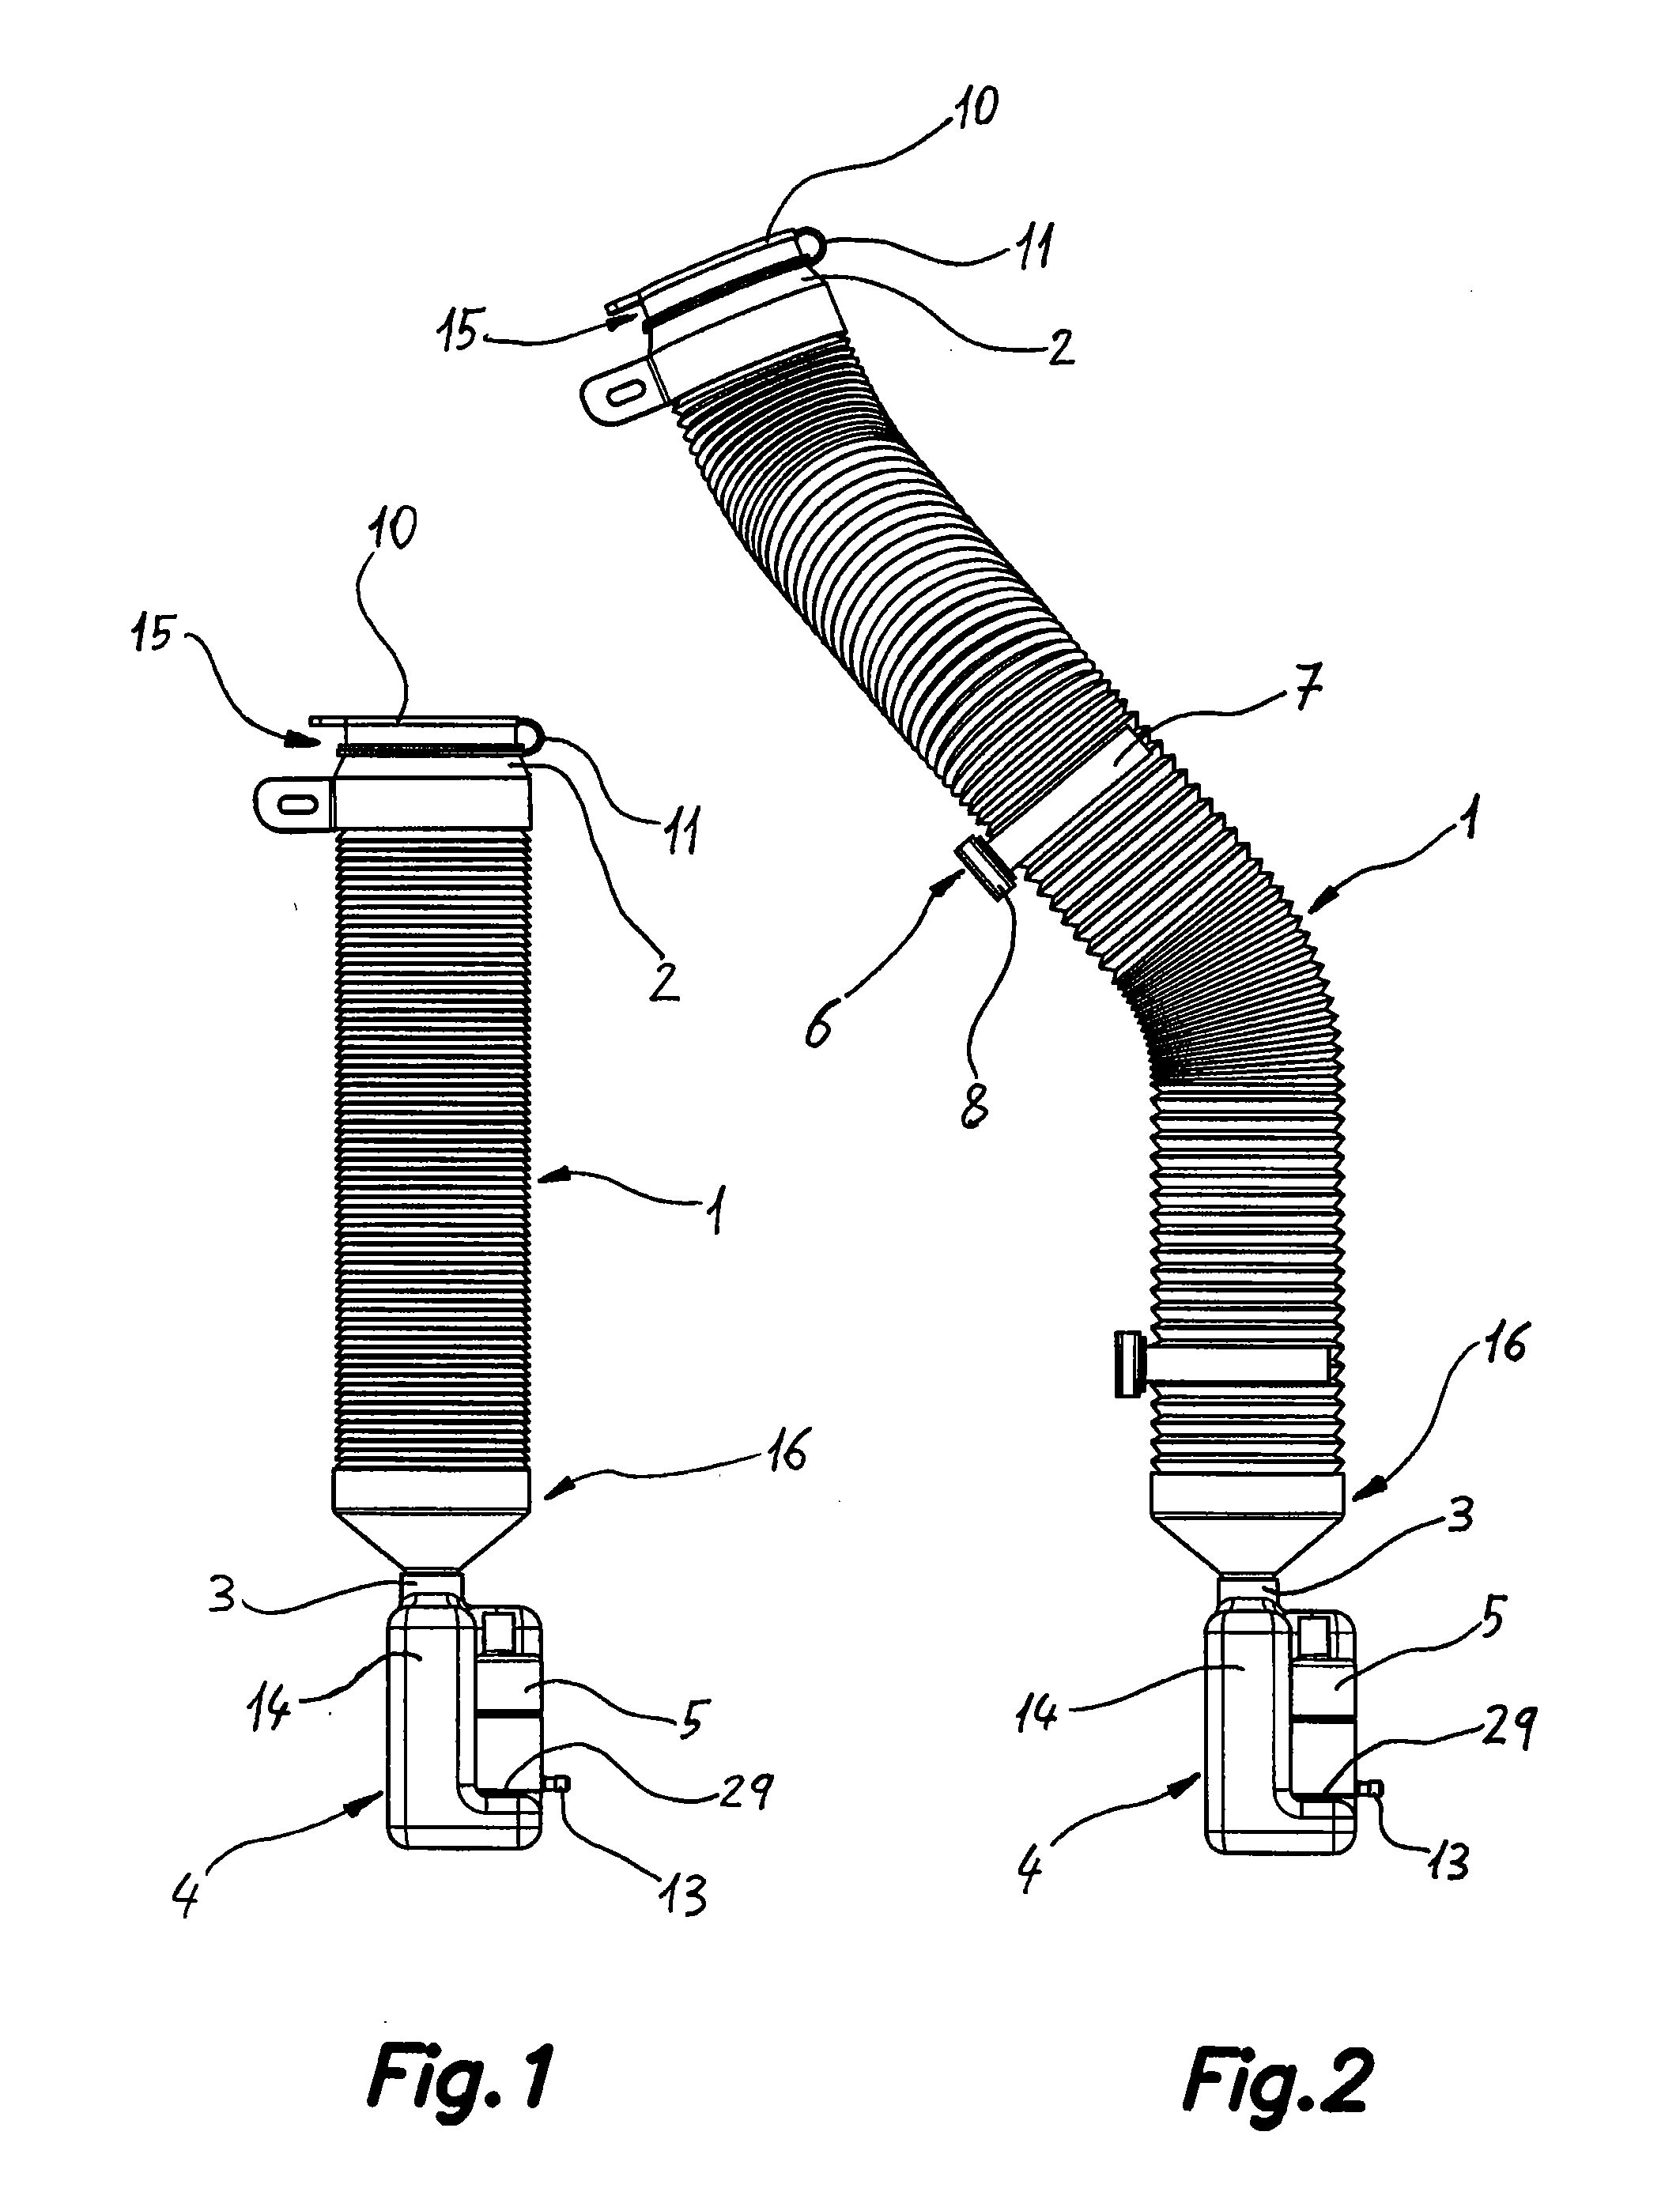 Container assembly for windshield and headlight washing fluid in a vehicle